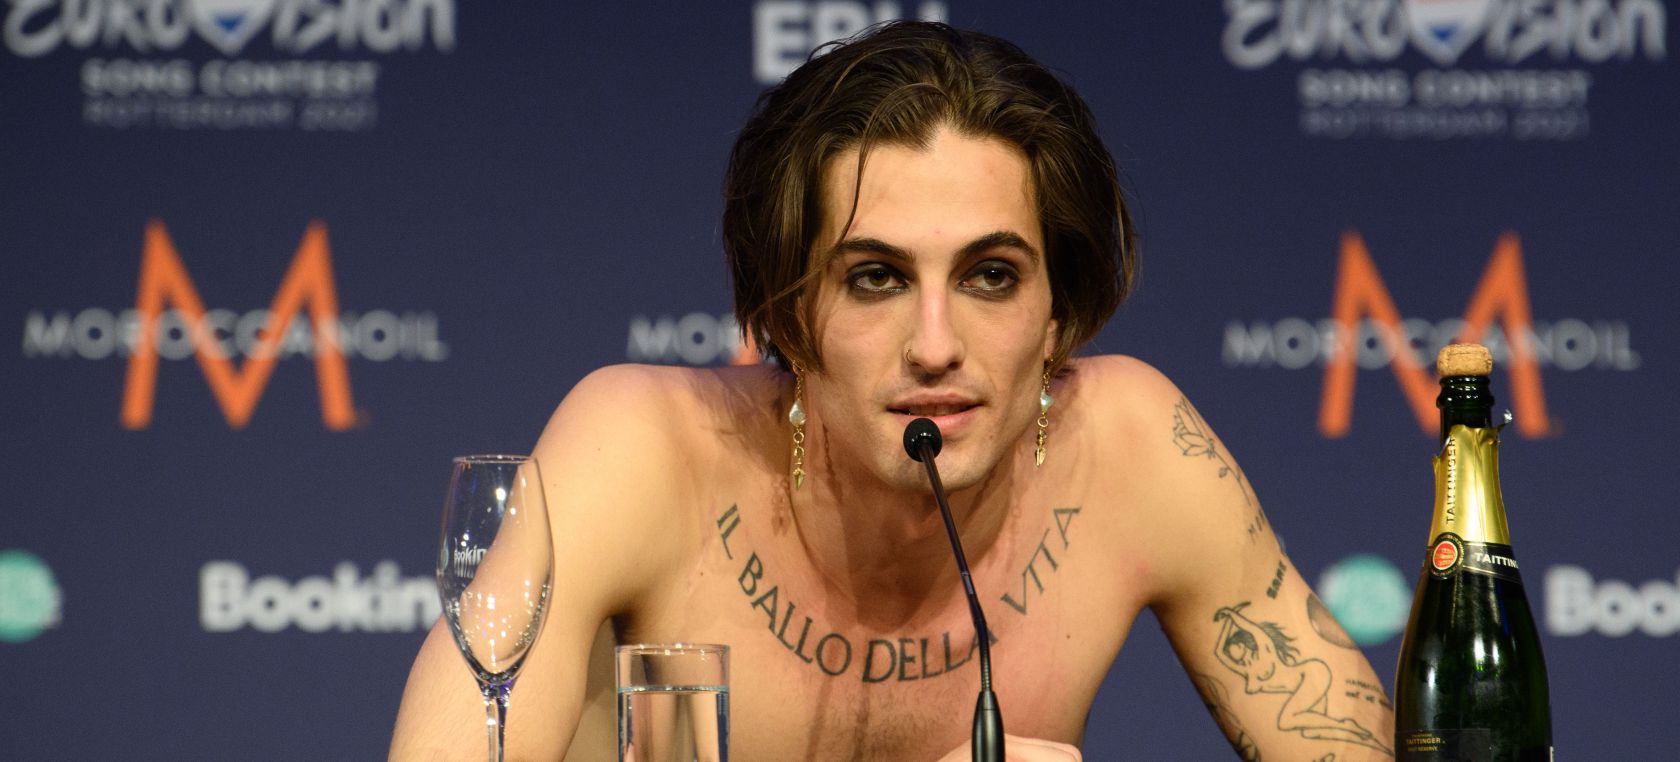 Damiano David at the press conference after Maneskin's victory at Eurovision 2021